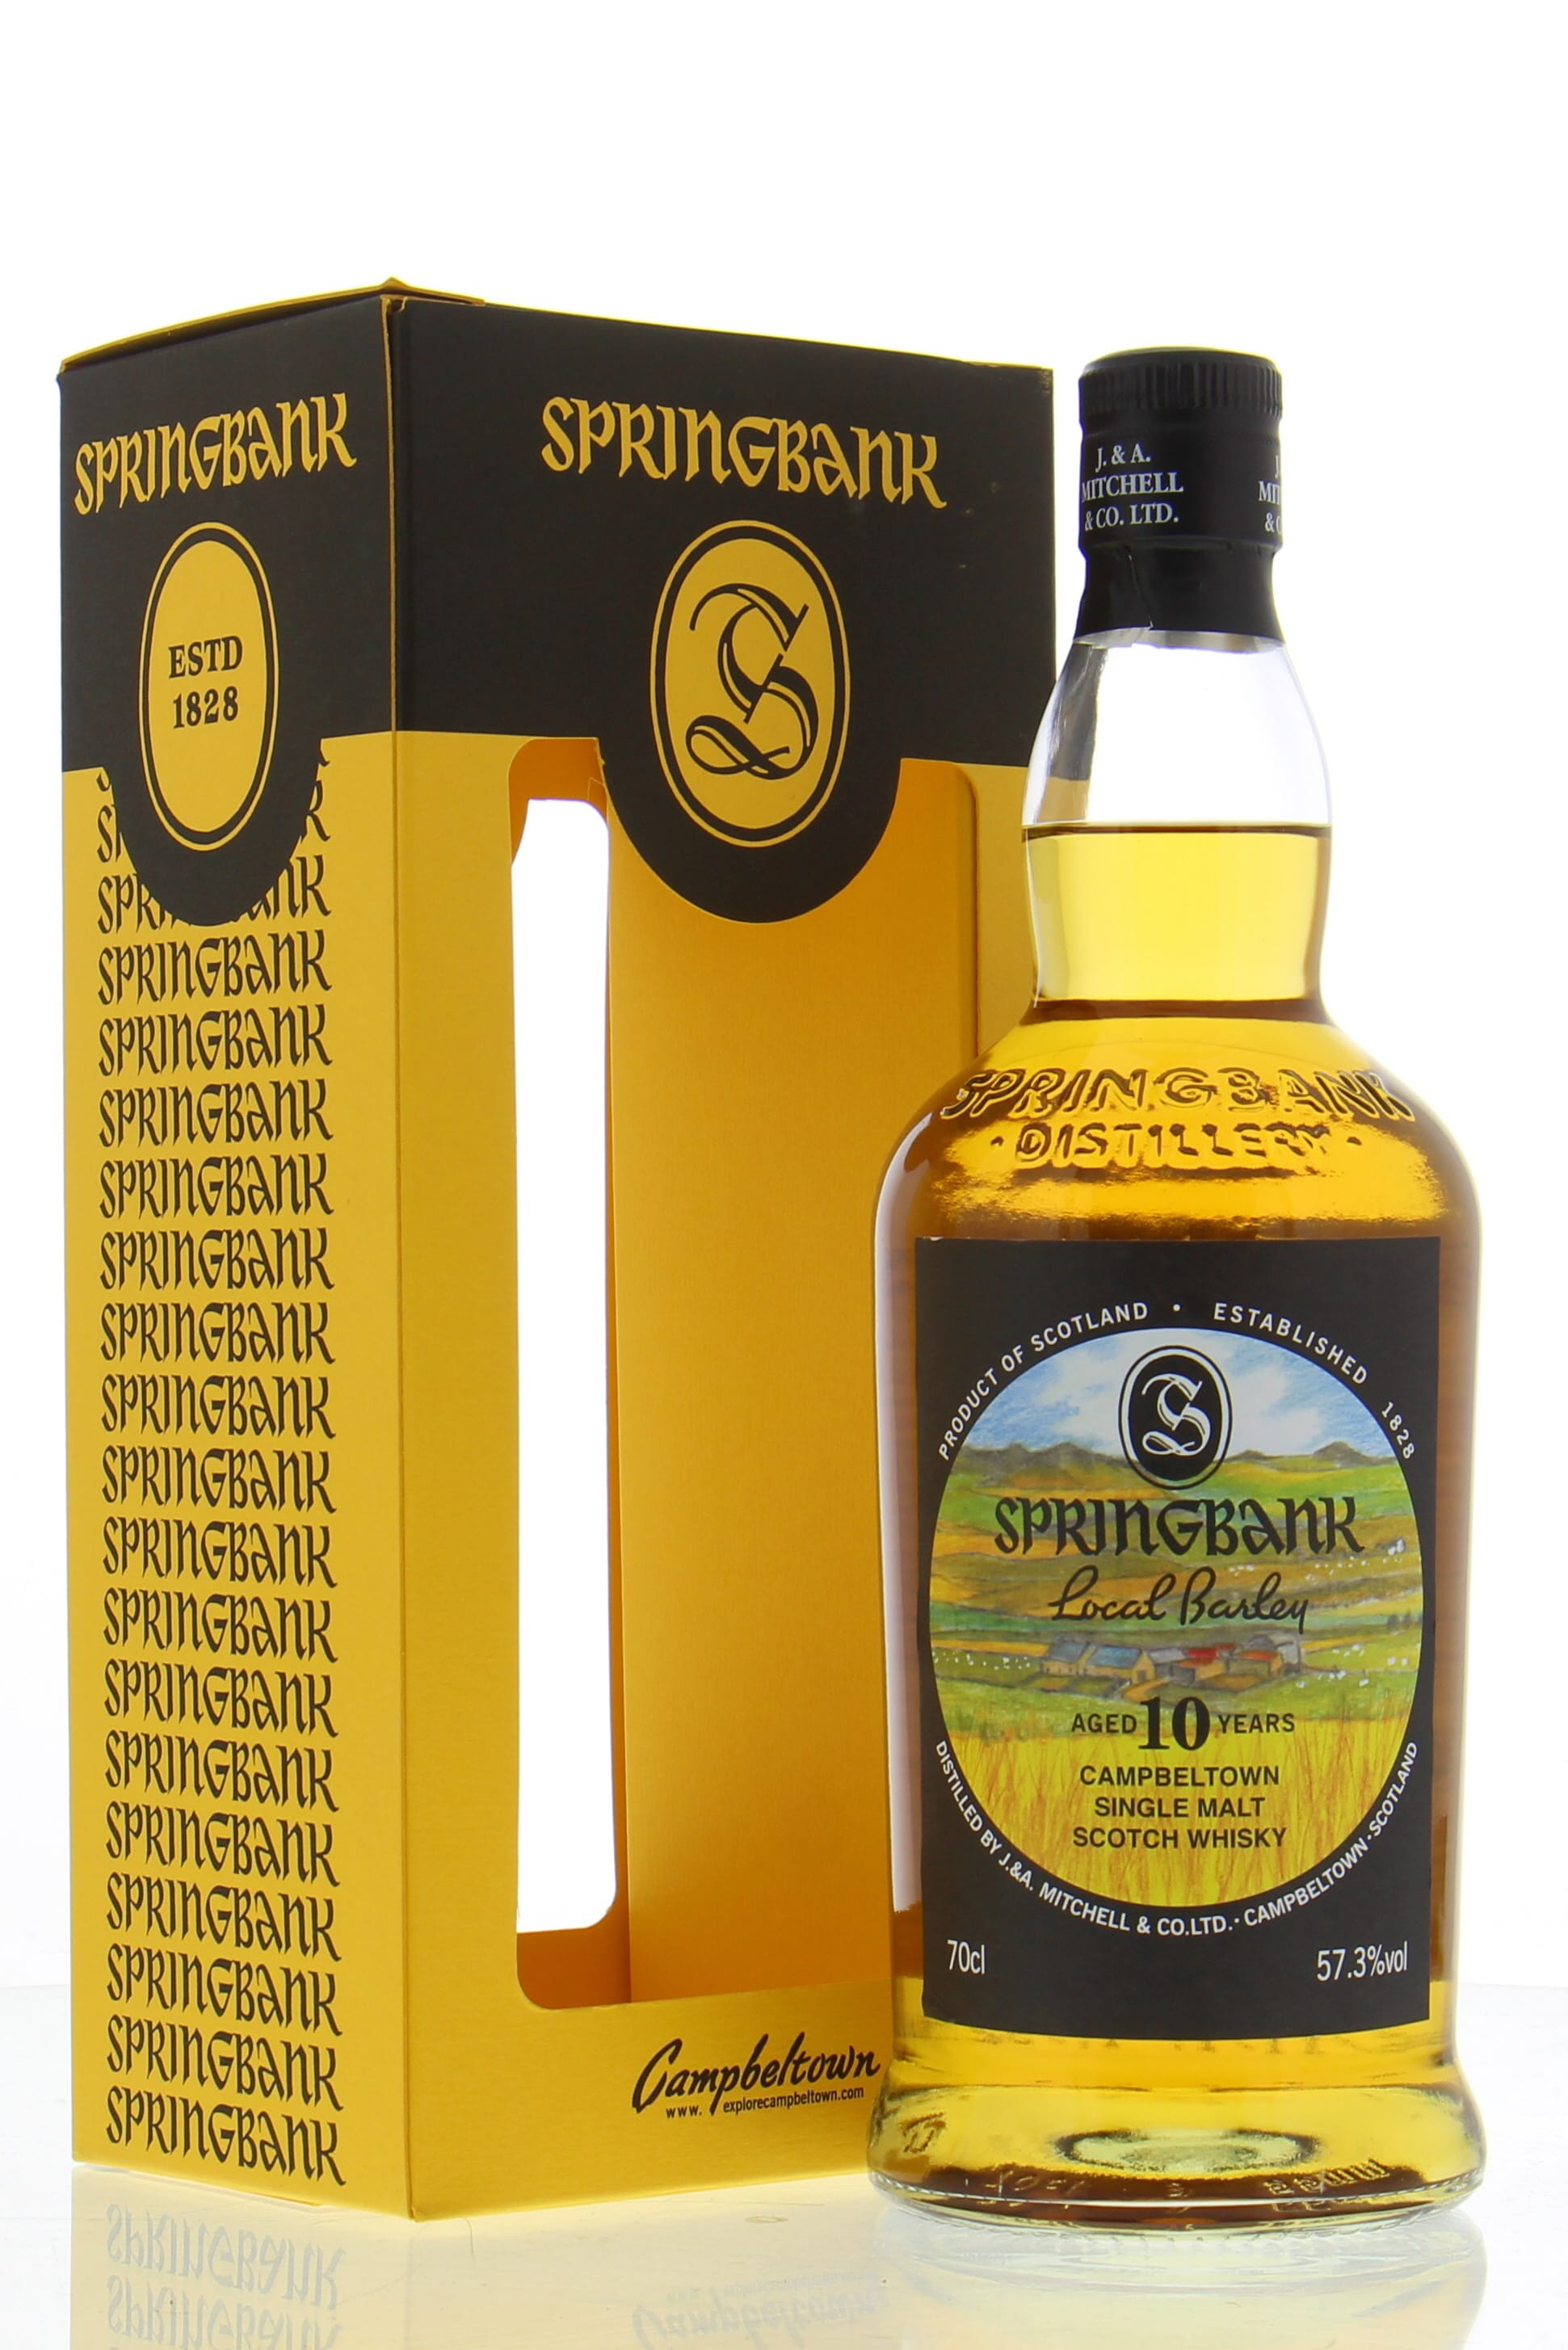 Springbank - 10 Years Old Local Barley 57.3% 2007 In Original Container